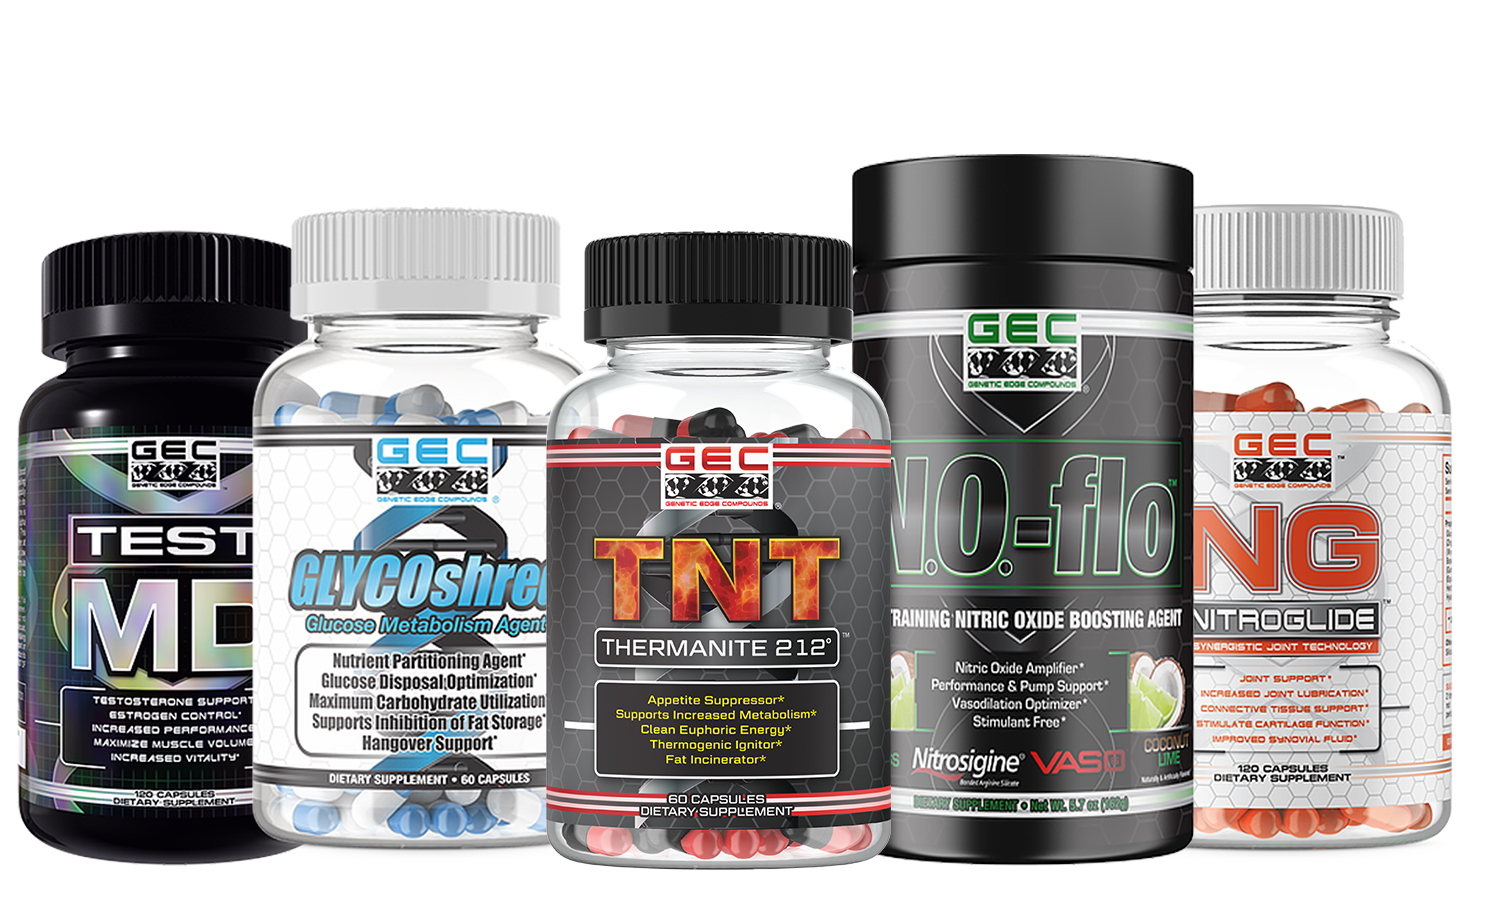 “GEC makes high-quality nutritional supplements for anyone who wants to improve their physical appearance or who needs an extra boost when they are working out,” said Brad Howard, CEO of the Texas-based health and wellness company. “We help you achieve your fitness goals.”

Genetic Edge Compounds now plans to promote nationwide five of its most popular supplements: N.O.-Flo, Thermanite 212, Nitroglide, Test MD, and GLYCOshred.

